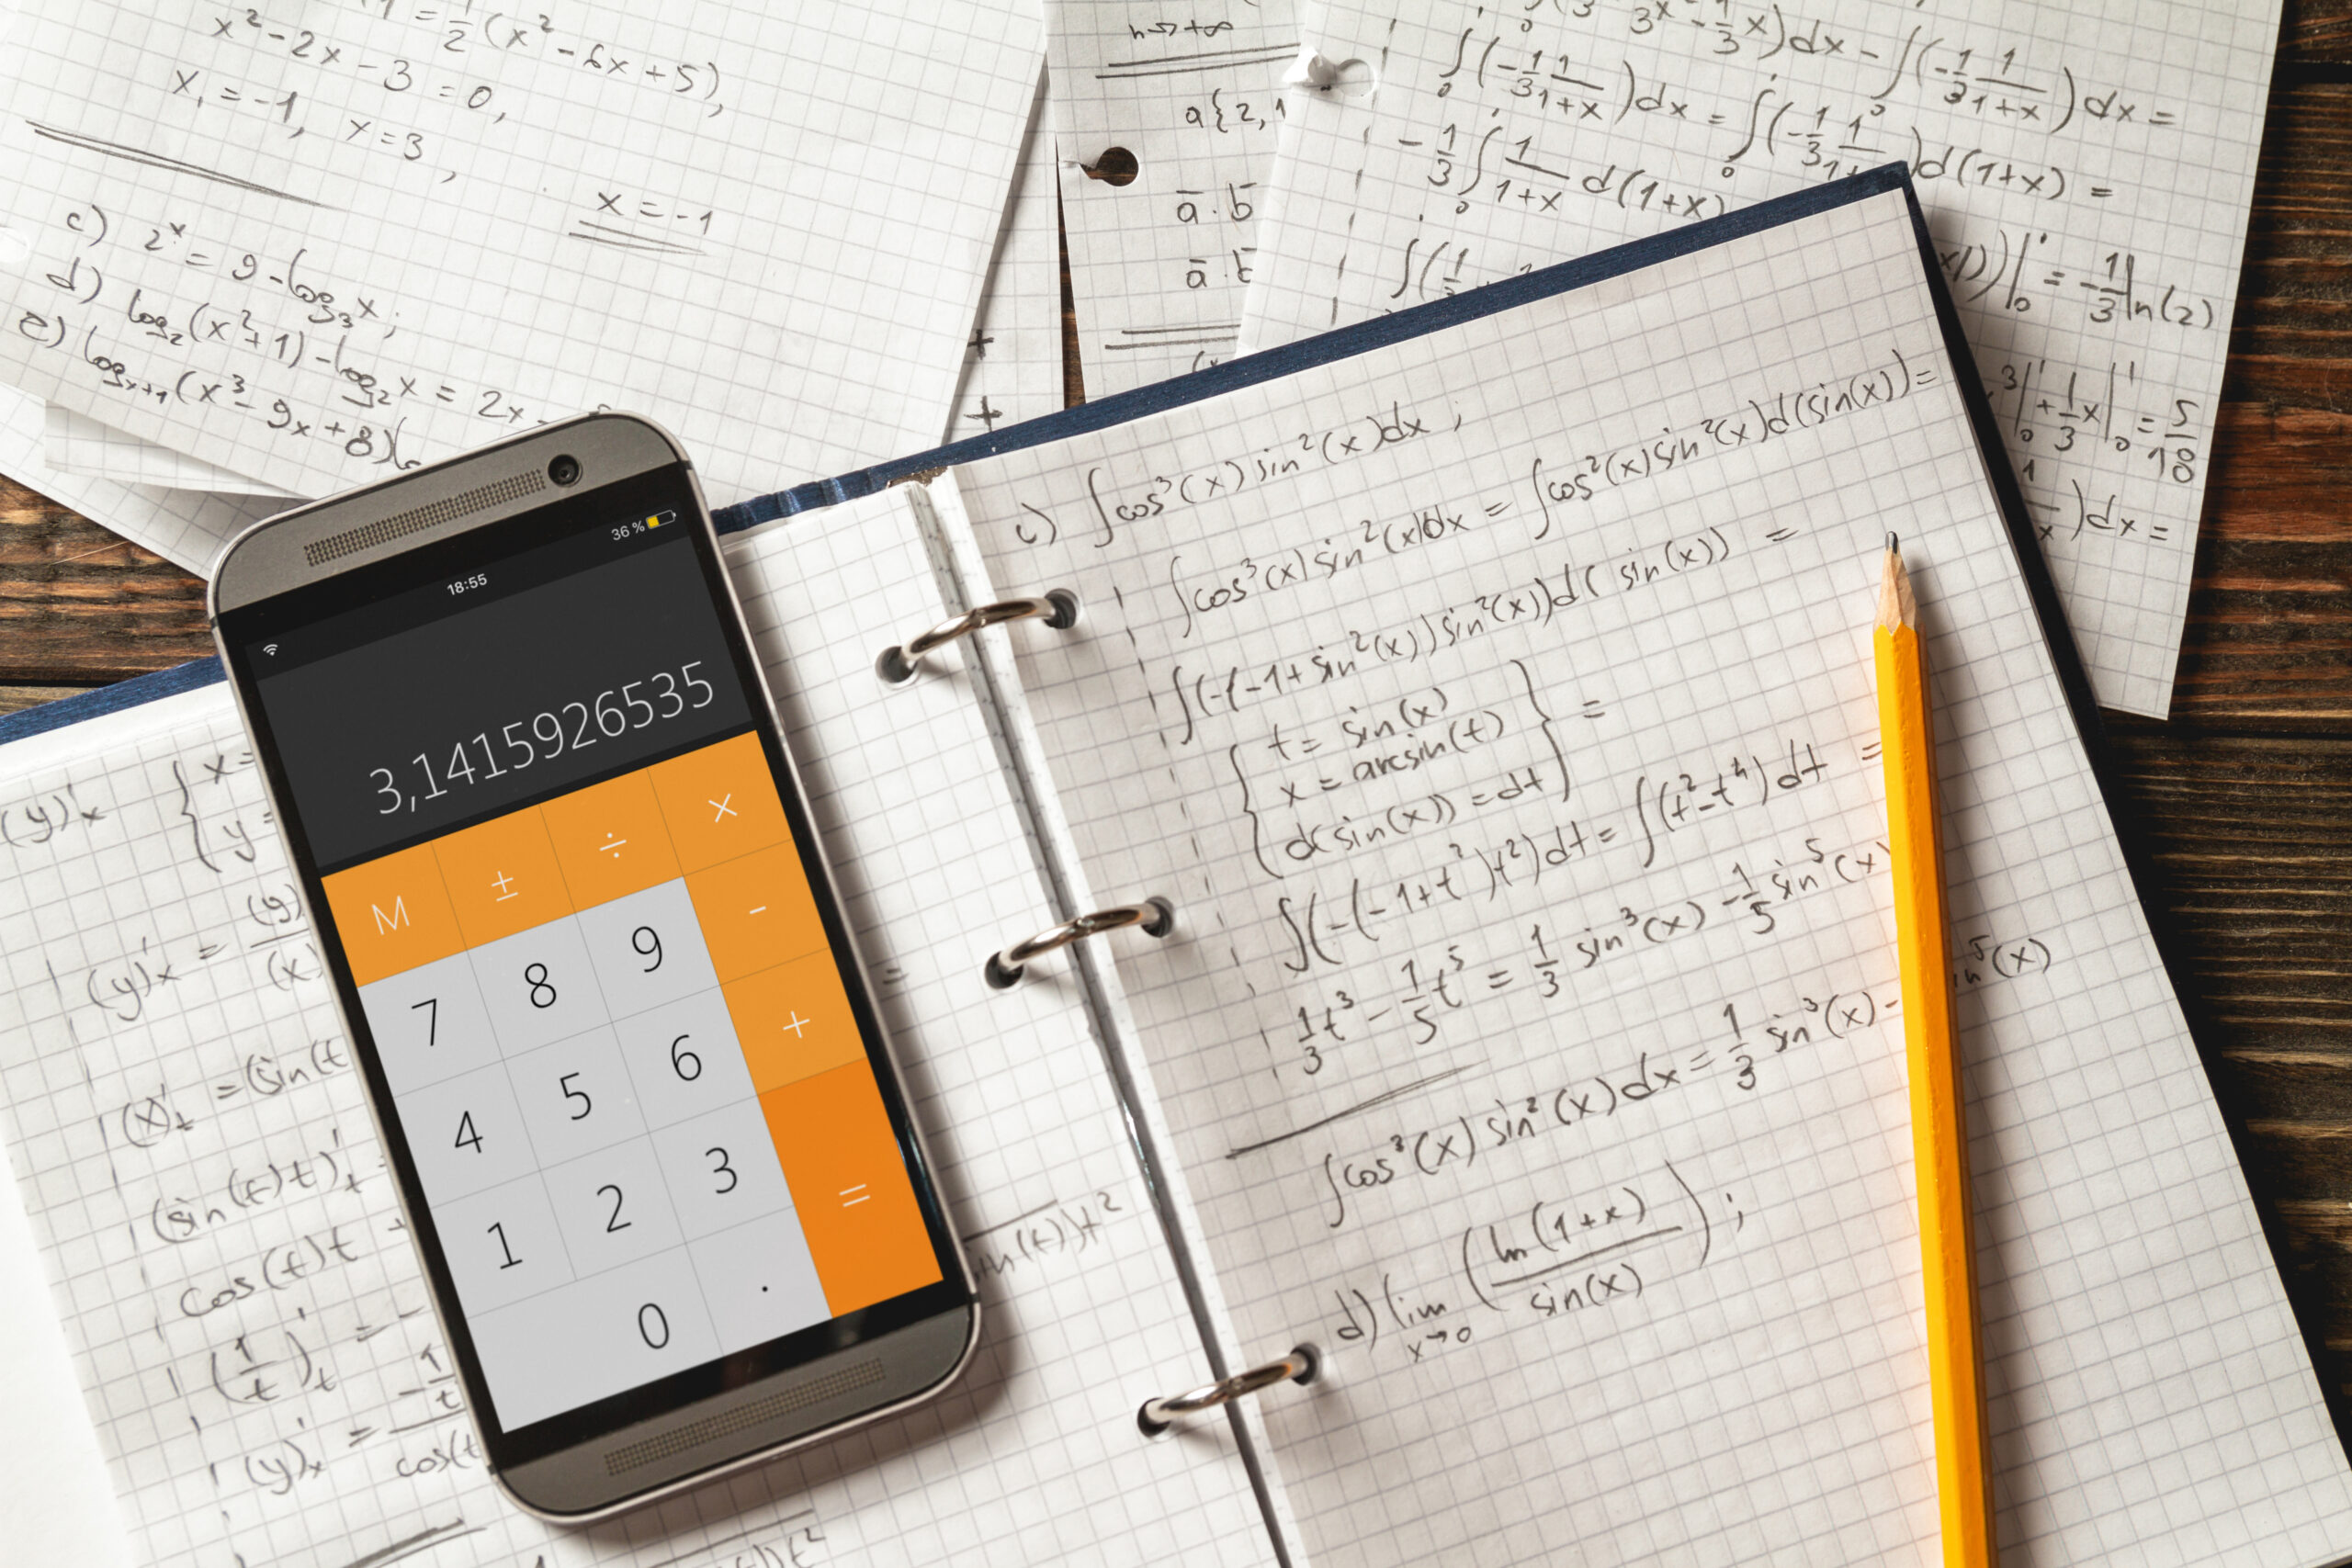 mathematical equations written in a notebook with a calculator next to it